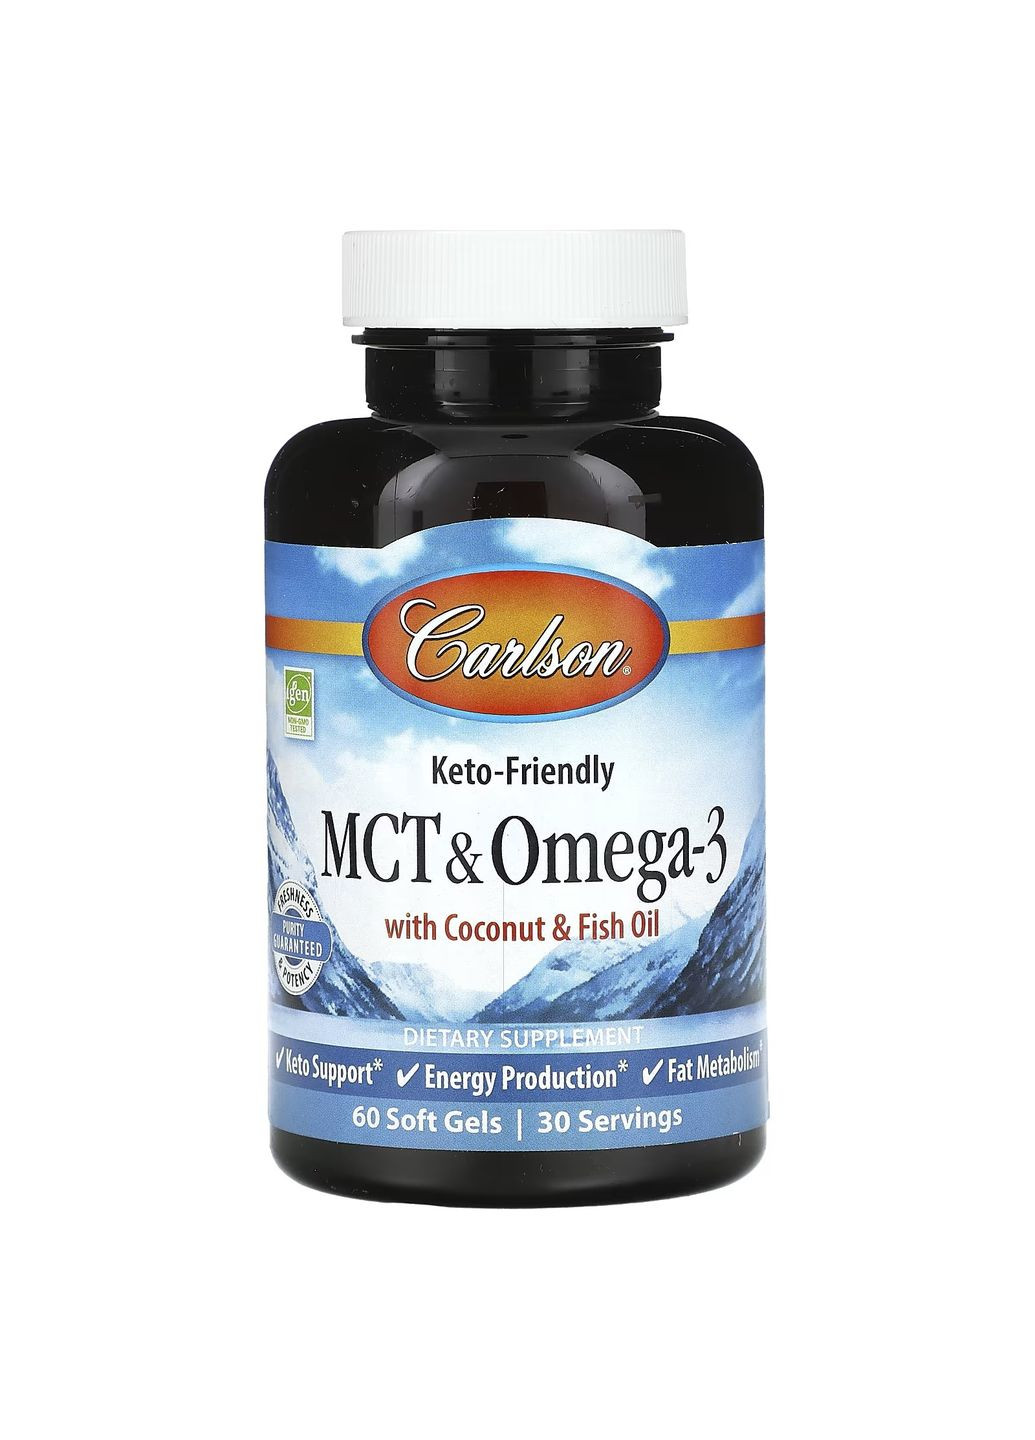 МСТ и Омега-3 Carlson MCT & Omega-3 With Coconut & Fish Oil, 60 Soft Gels Carlson Labs (291848506)